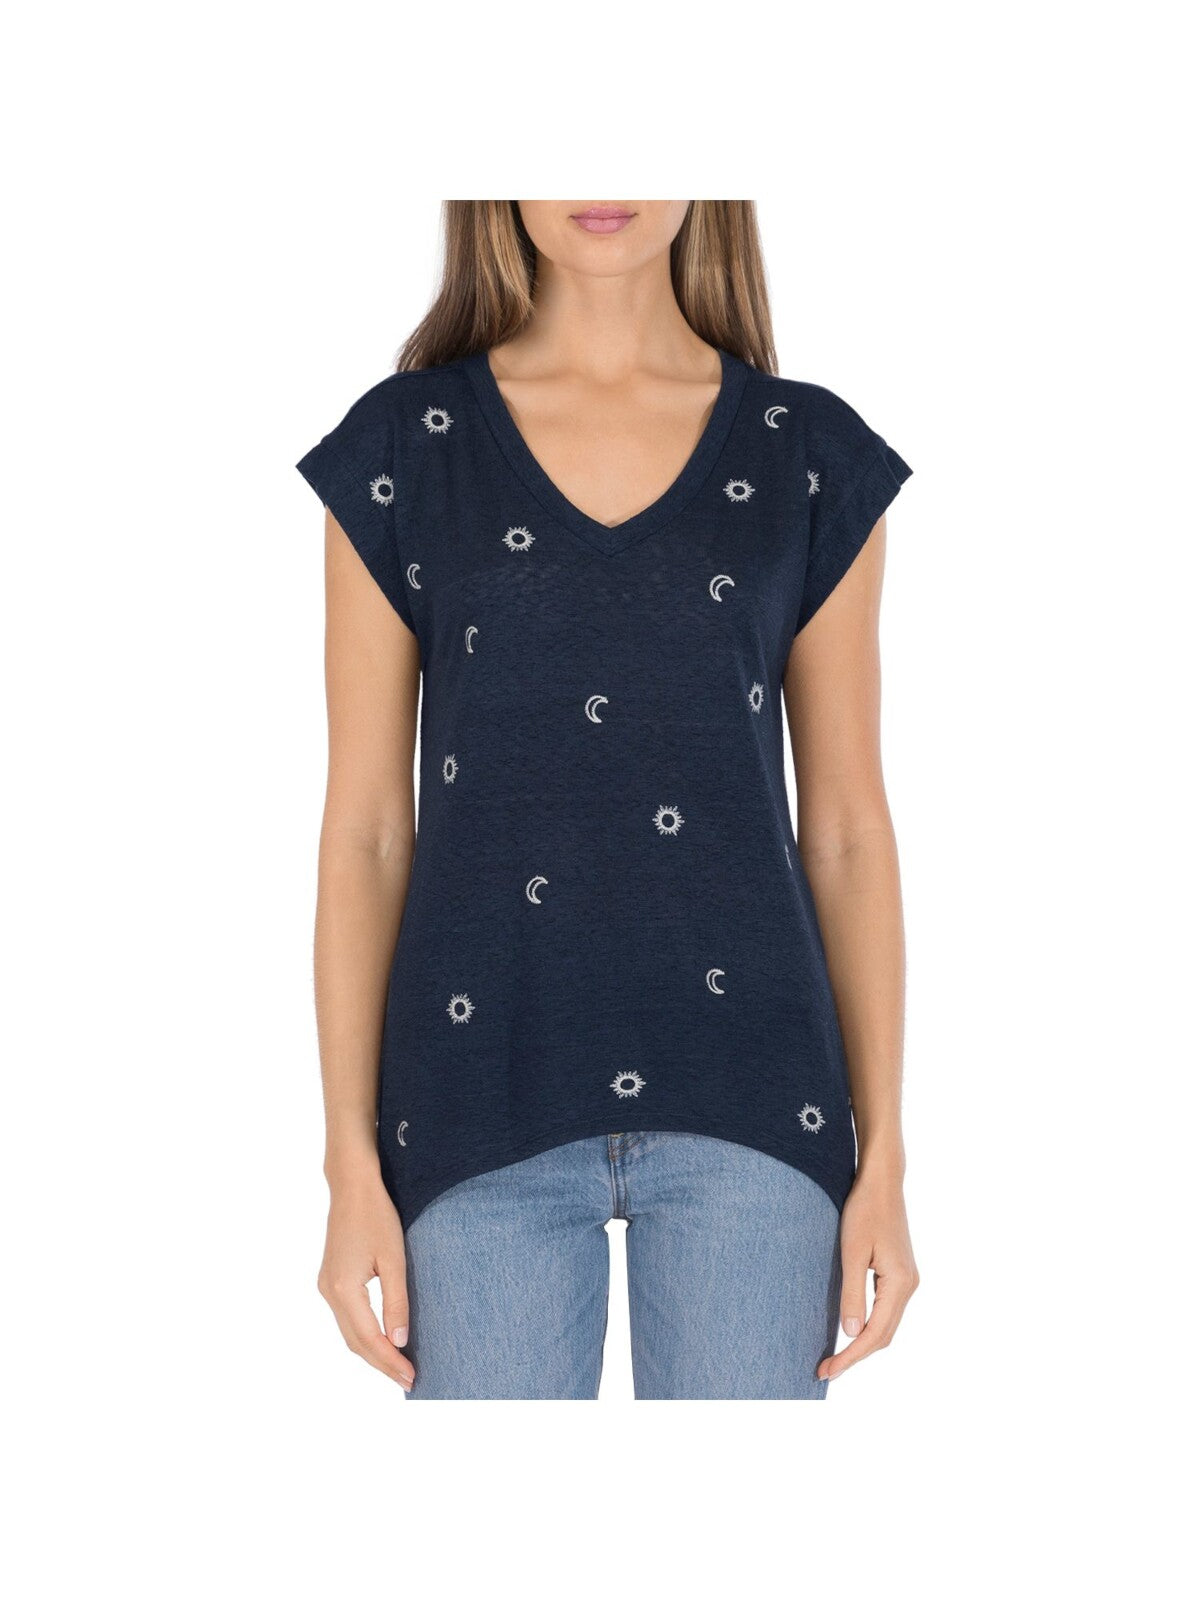 B COLLECTION Womens Navy Embroidered Printed Cap Sleeve V Neck T-Shirt XS